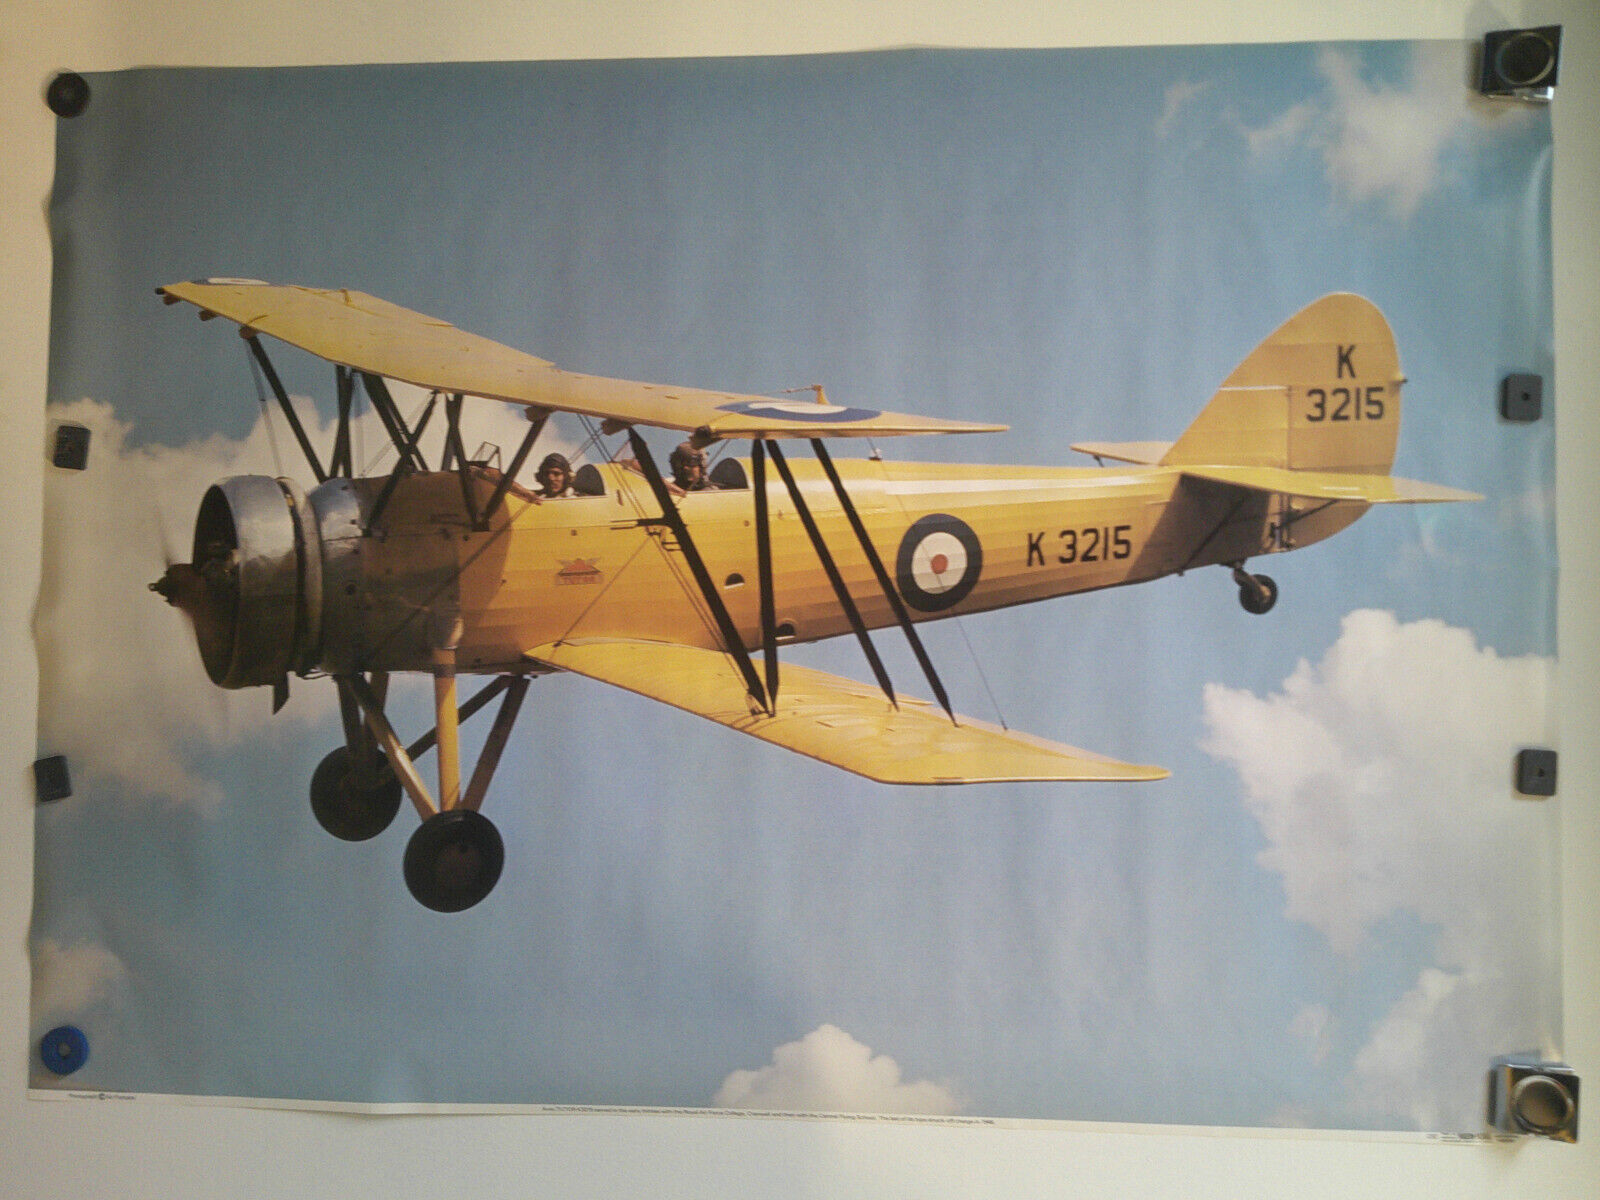 PLAISTOW PICTORIAL #C92 AVRO TUTOR SHUTTLEWORTH COLLECTION POSTER 25\